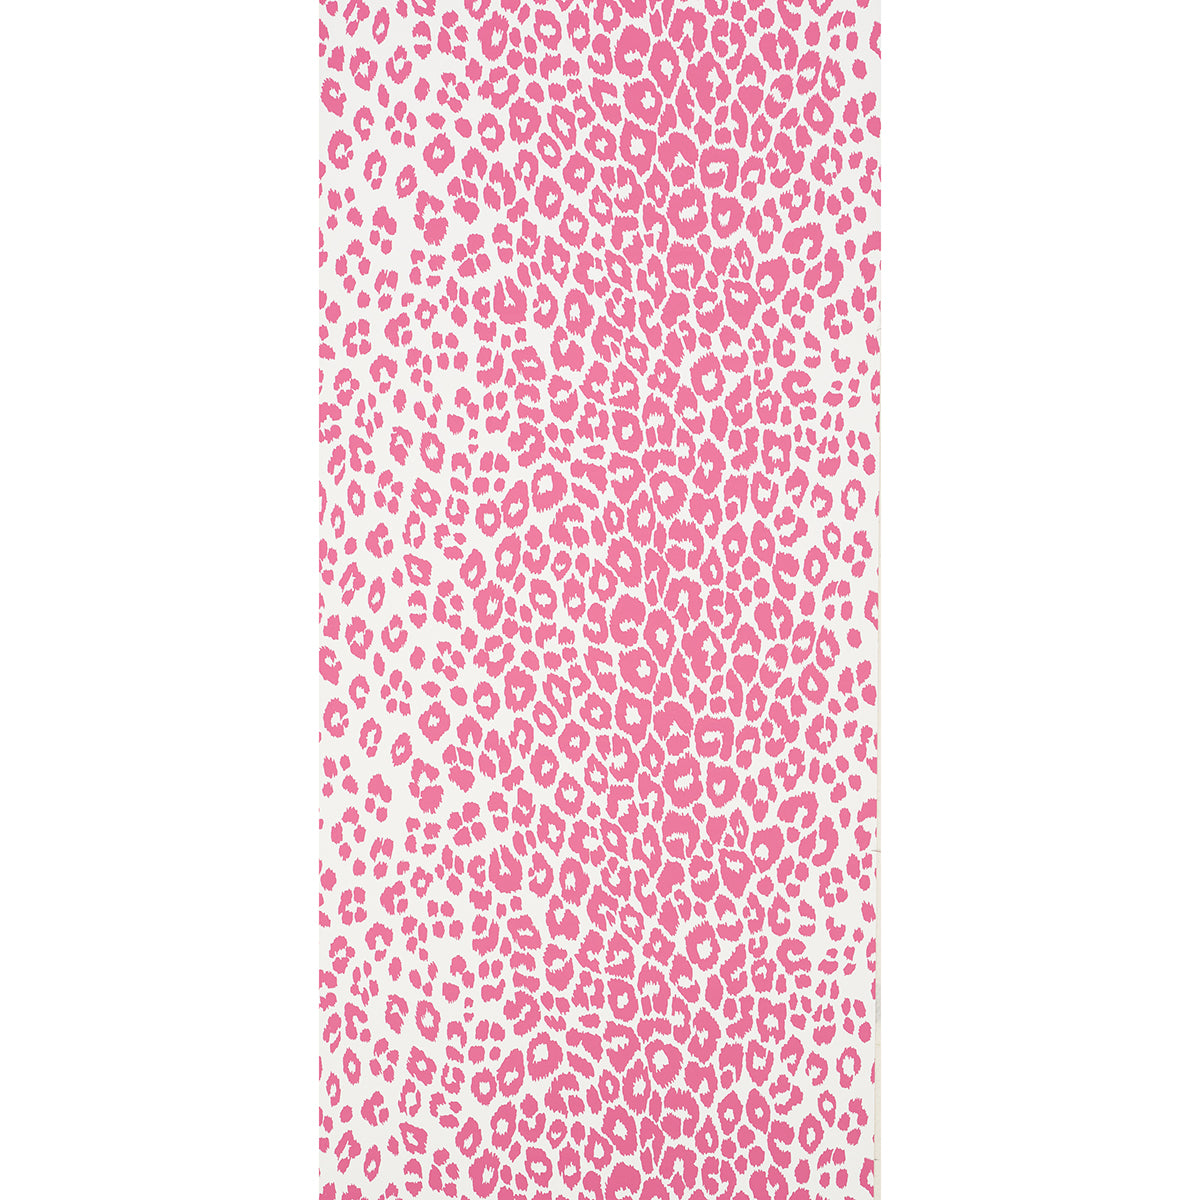 ICONIC LEOPARD | PINK